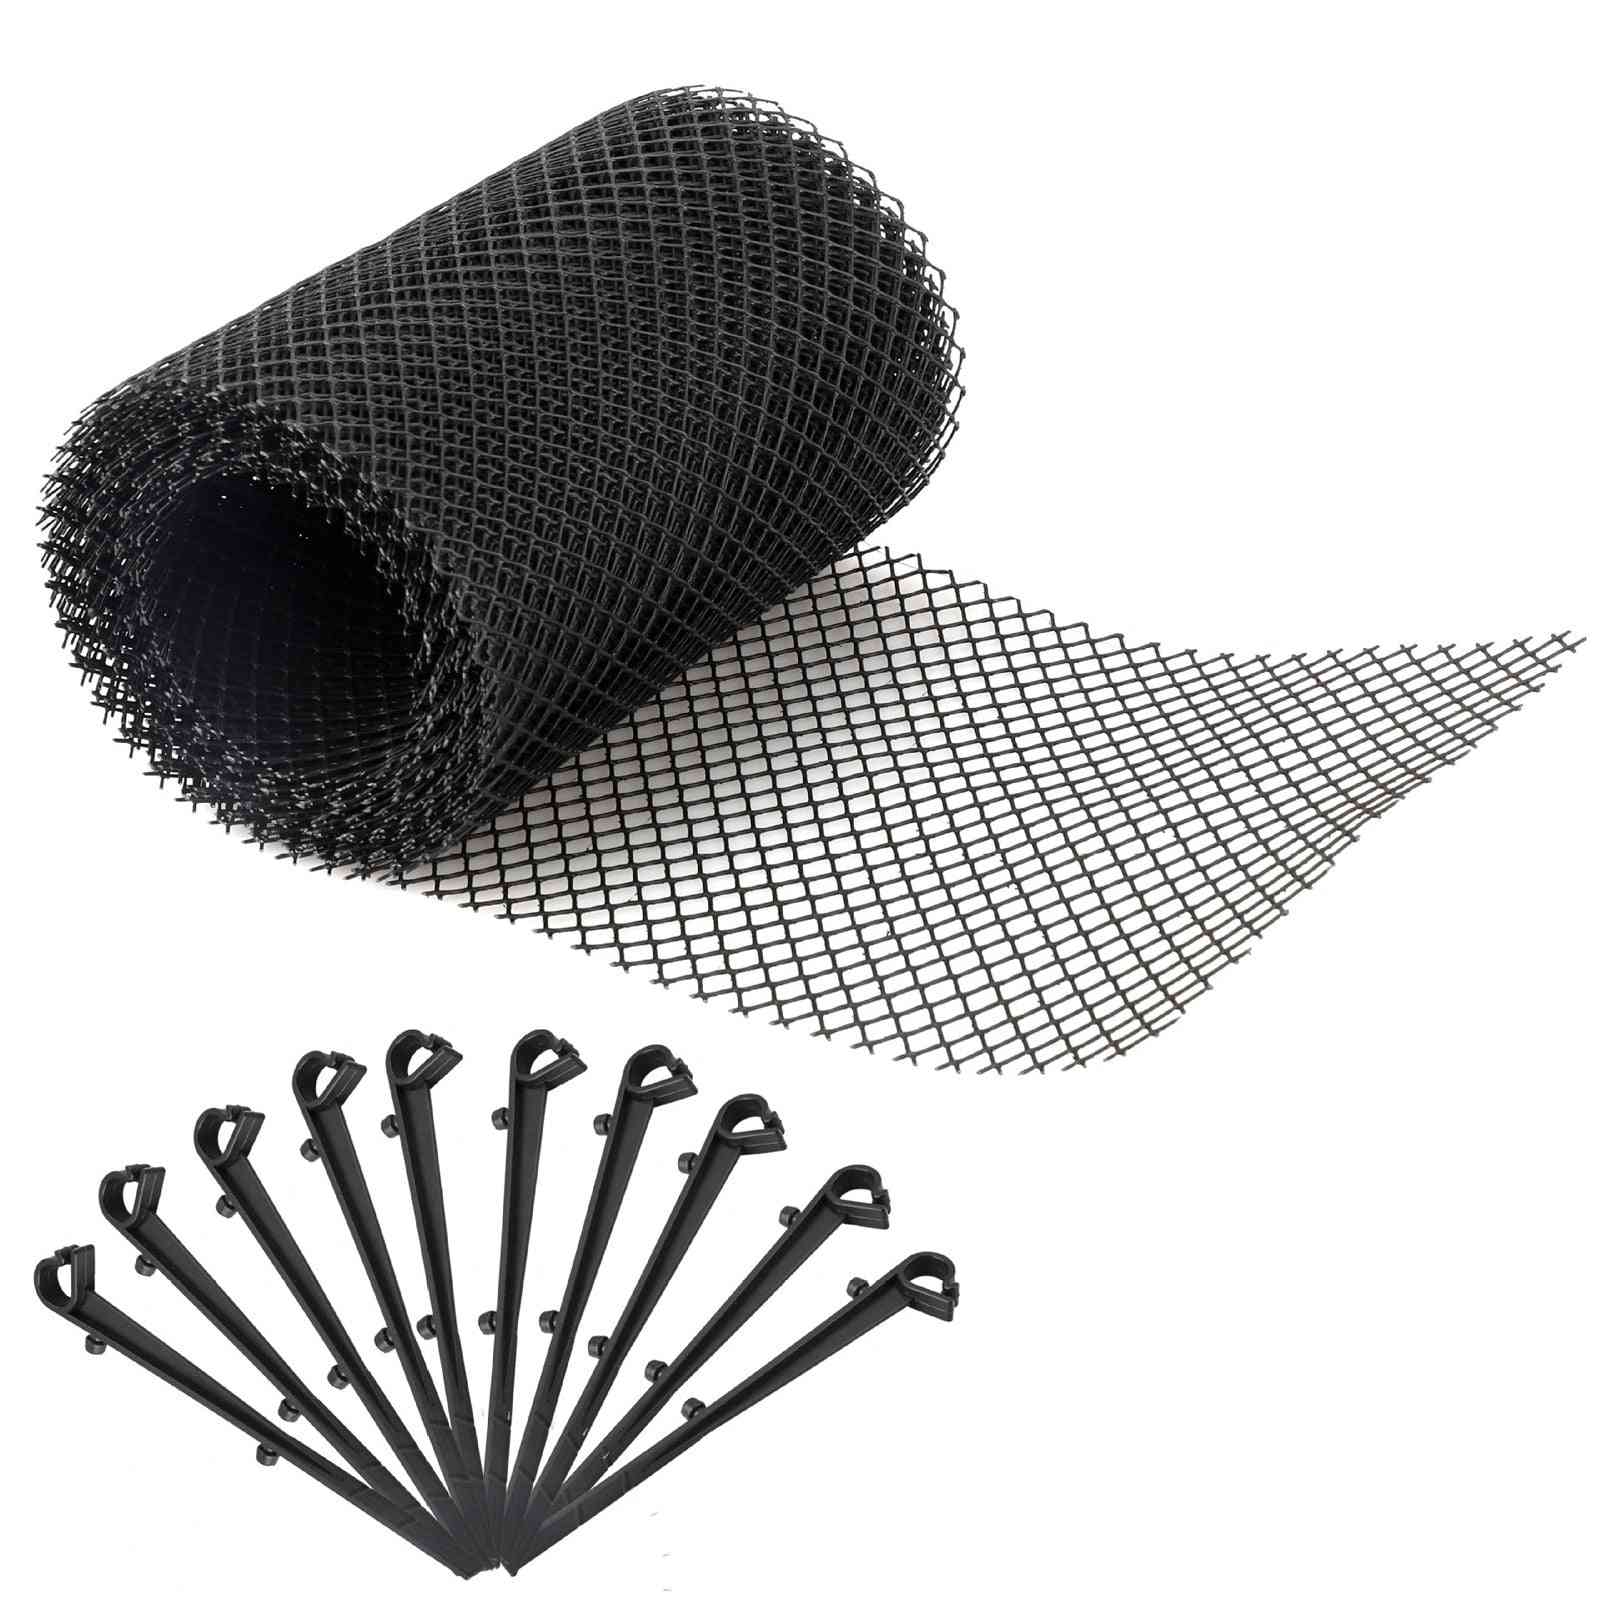 Stops Leaves Drain With Stakes Mesh Cover, Flexible Gutter Guard, Cleaning Tool